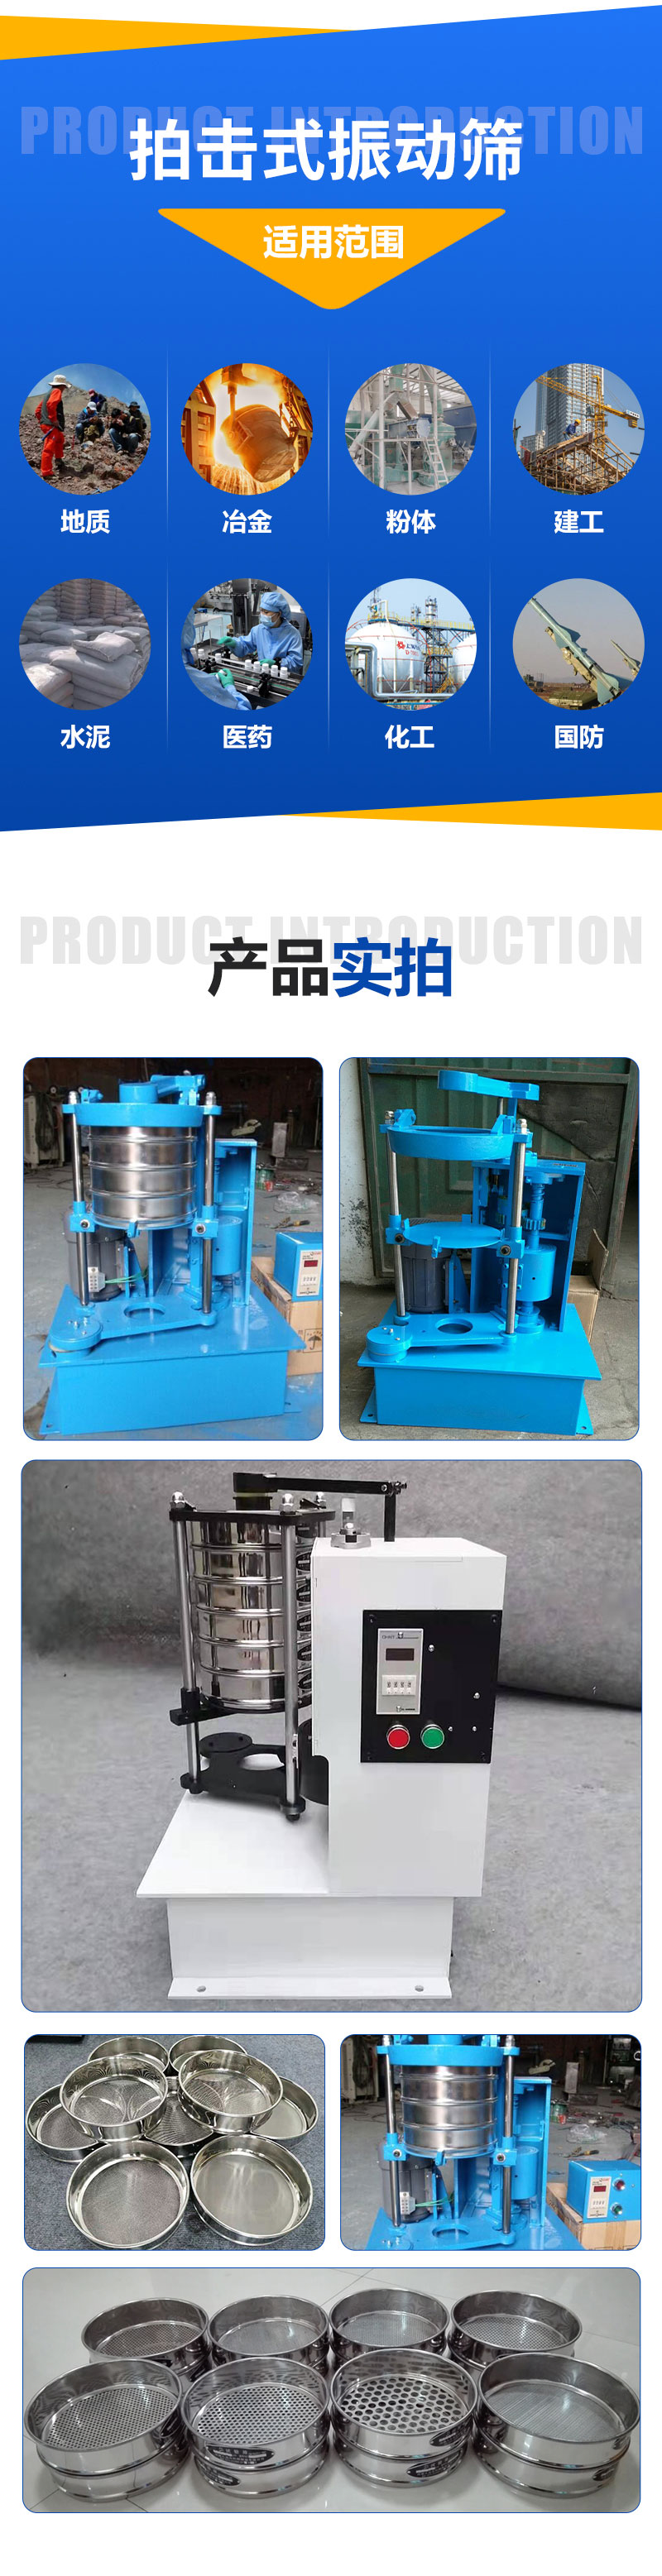 The application of percussion type standard sieve vibrating machine in geological, metallurgical, powder, chemical, construction, cement, medicine, national defense